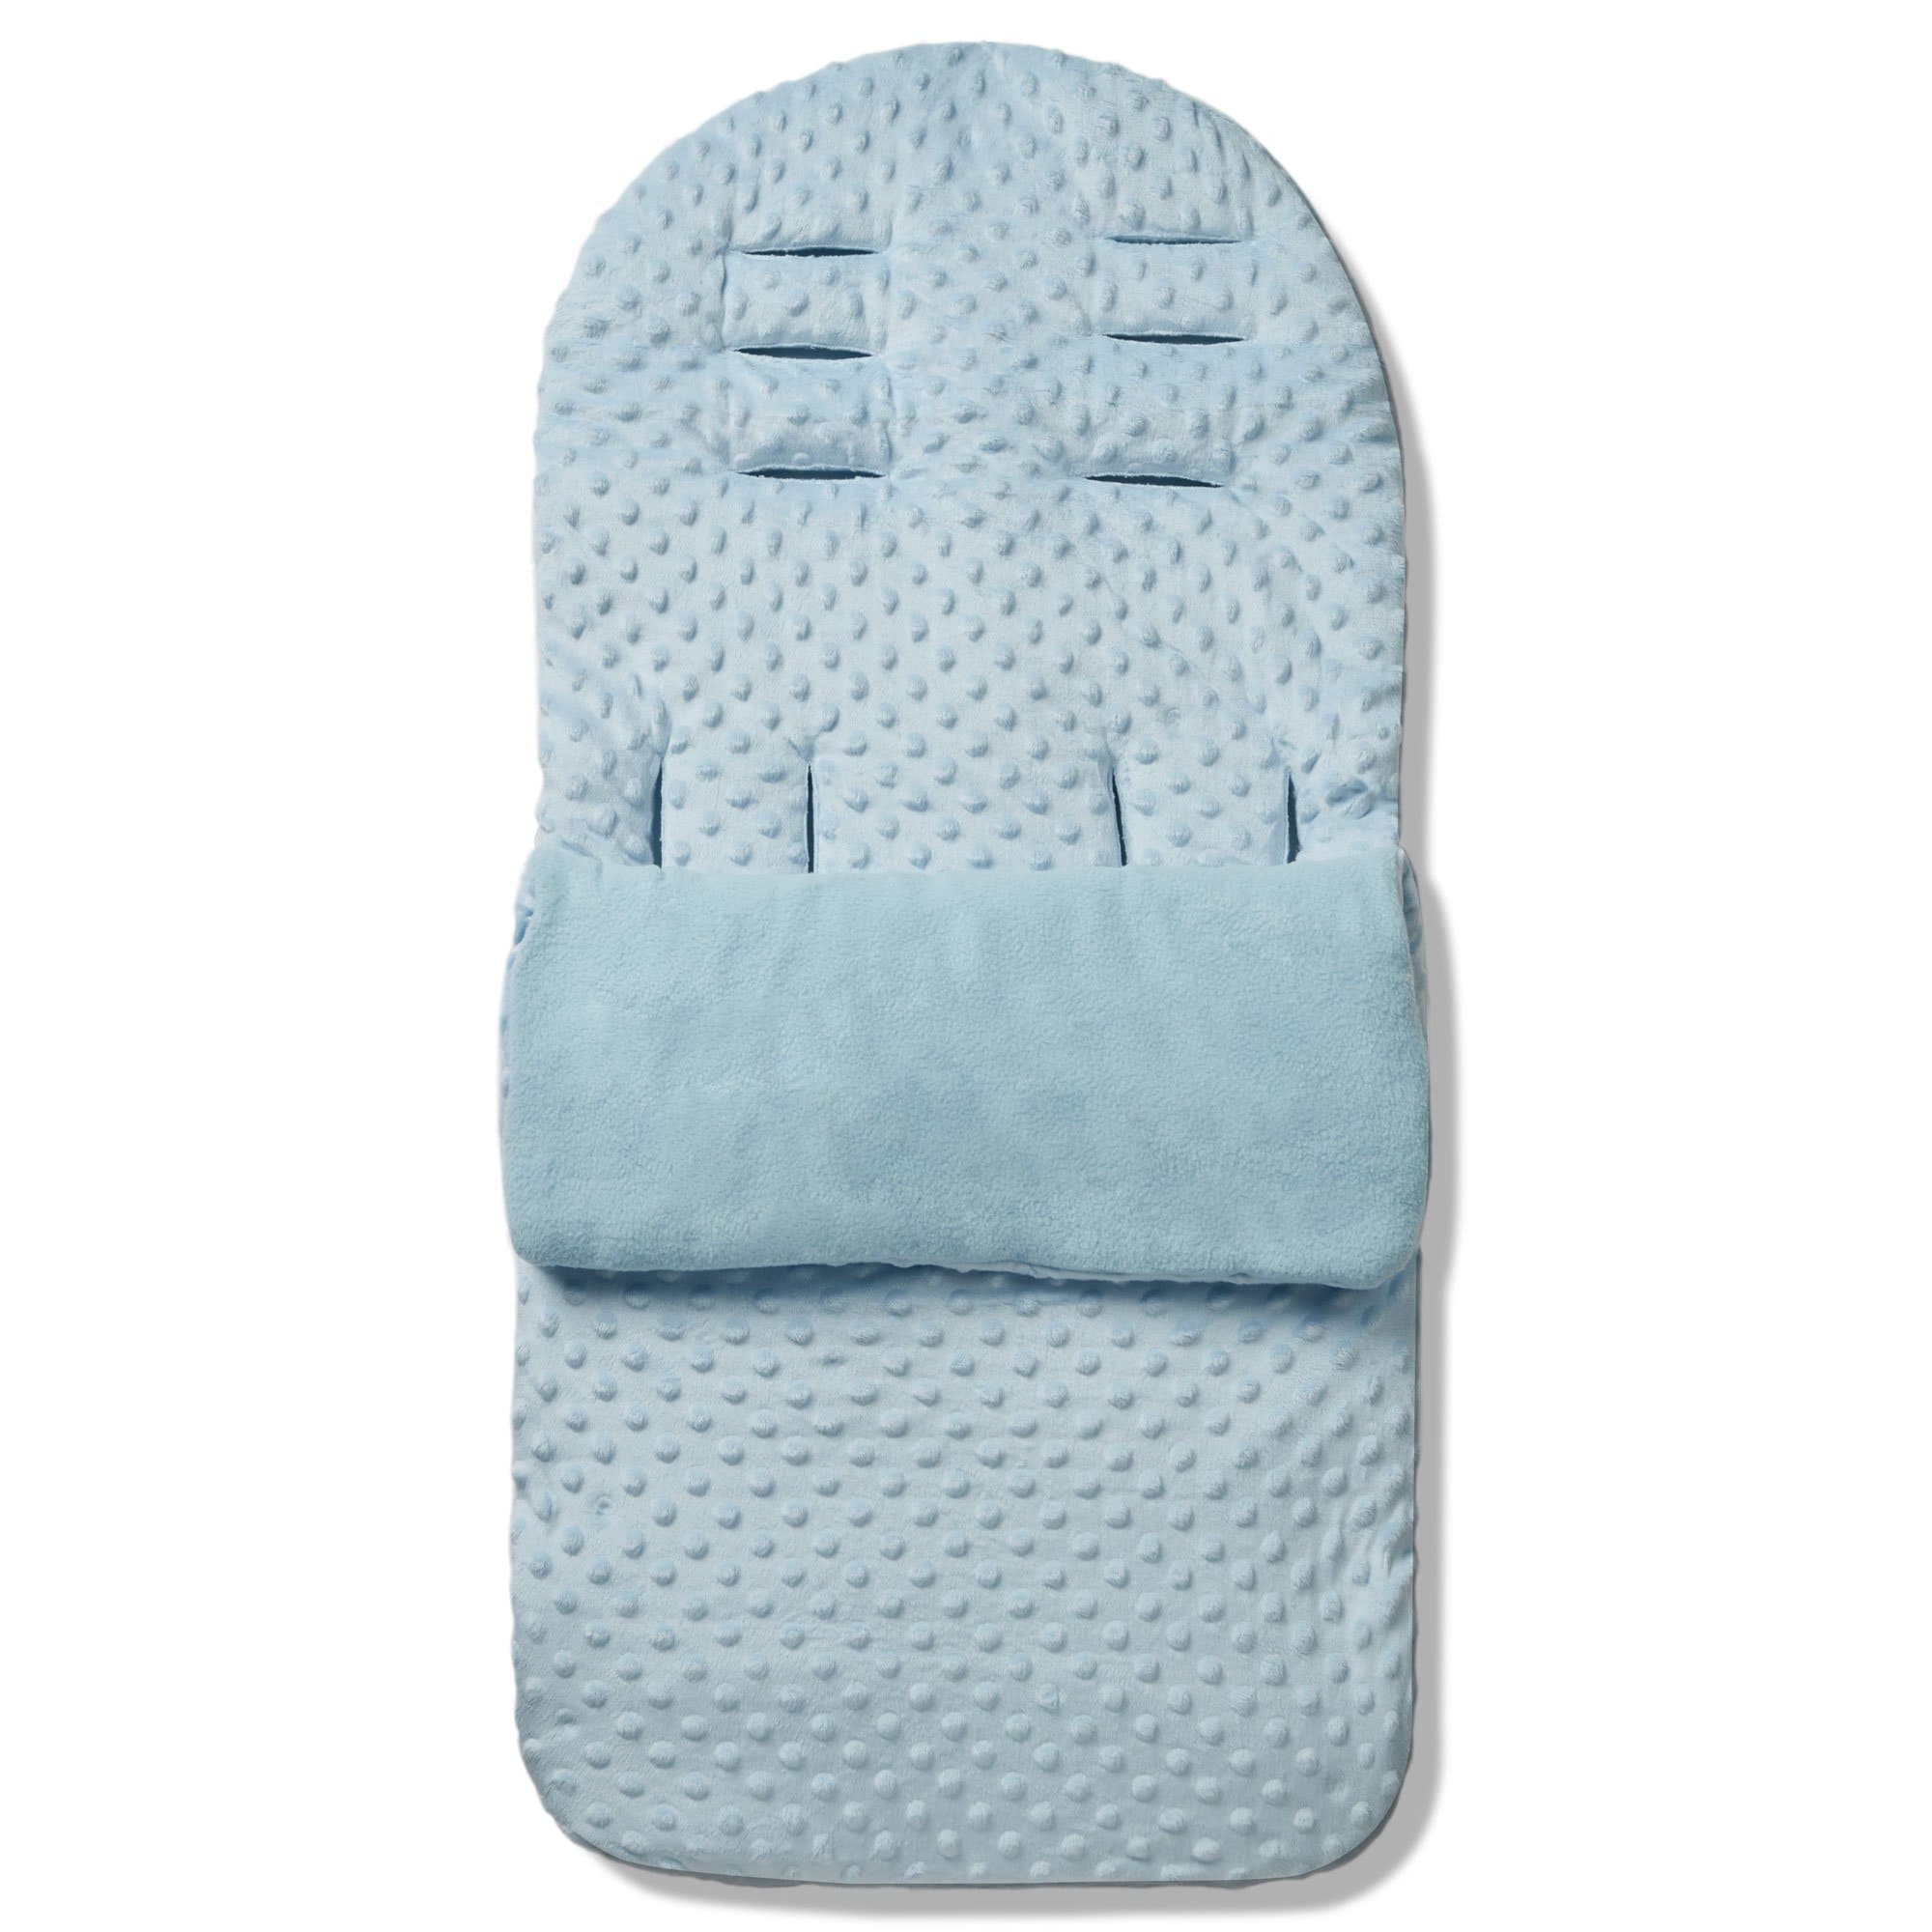 Dimple Footmuff / Cosy Toes Compatible with Hauck - Blue / Fits All Models | For Your Little One